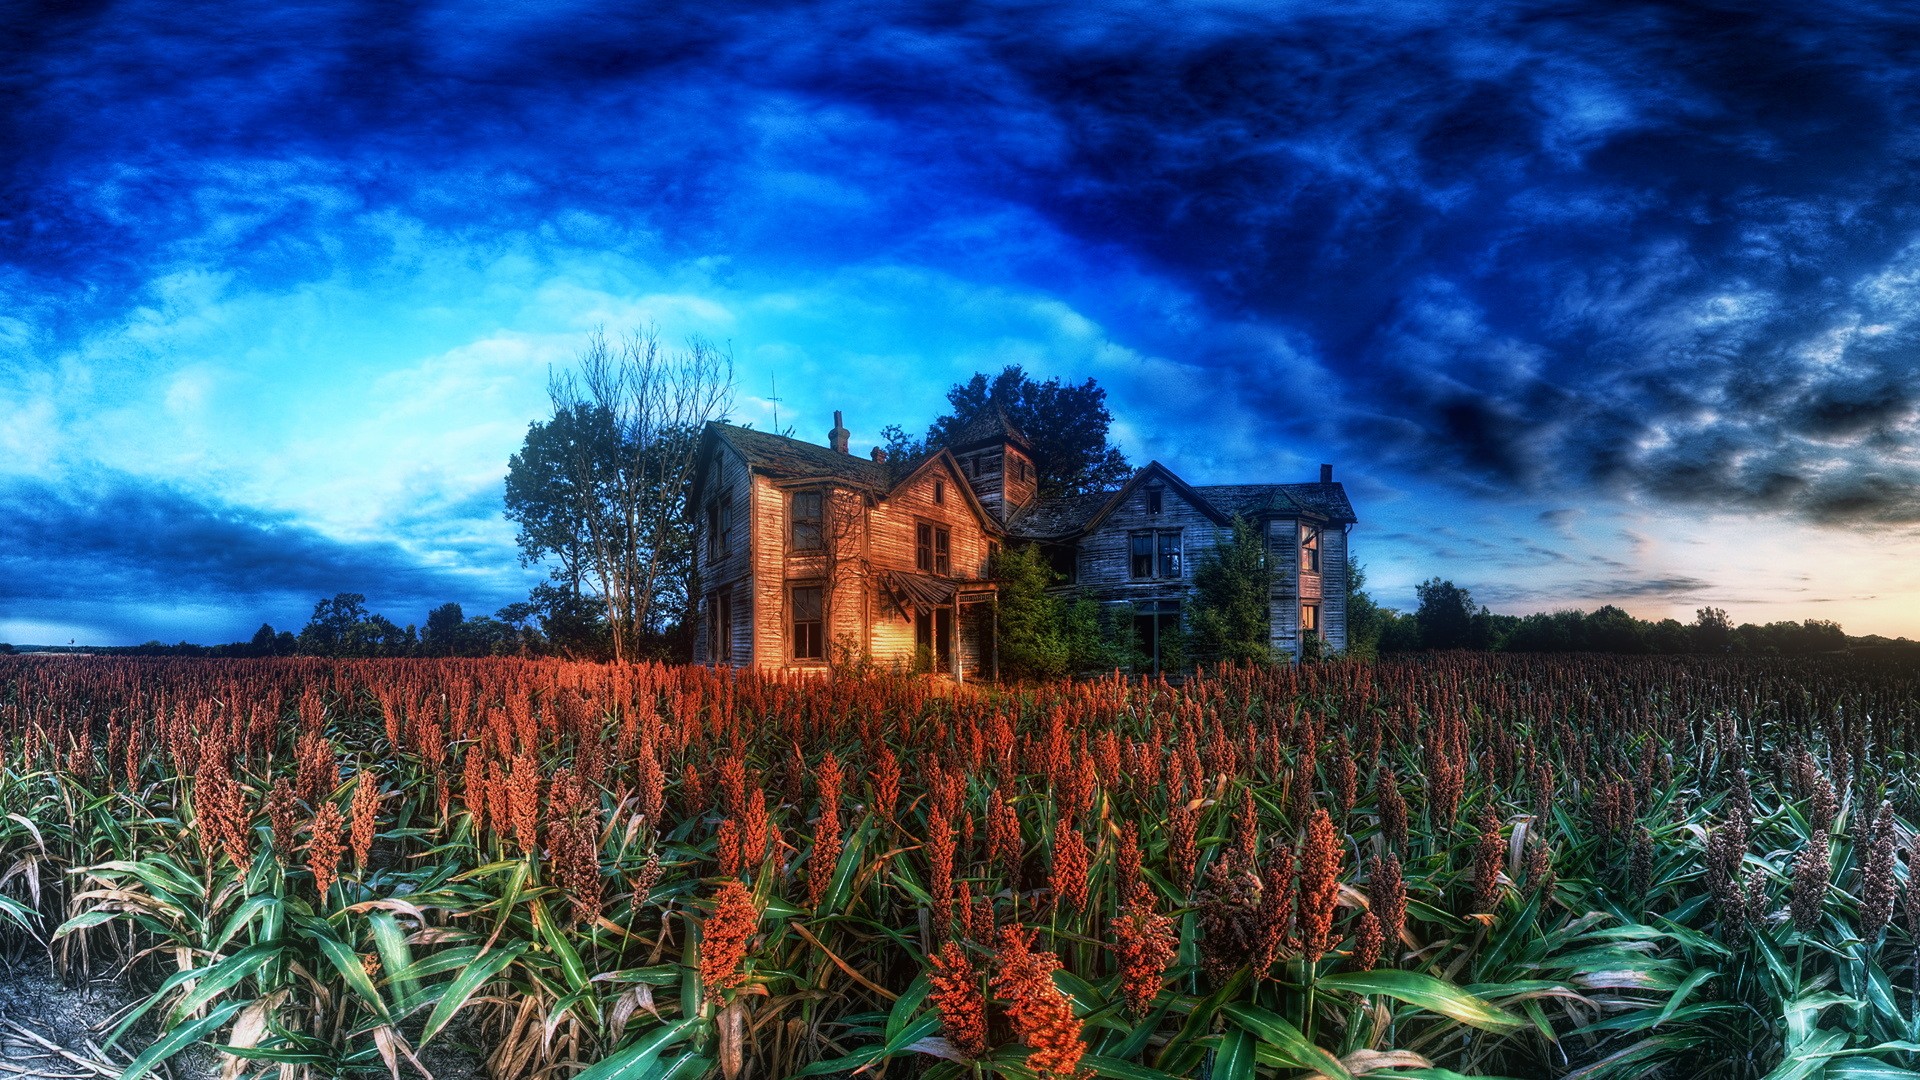 General 1920x1080 HDR clouds cabin plants trees abandoned sky landscape ruins